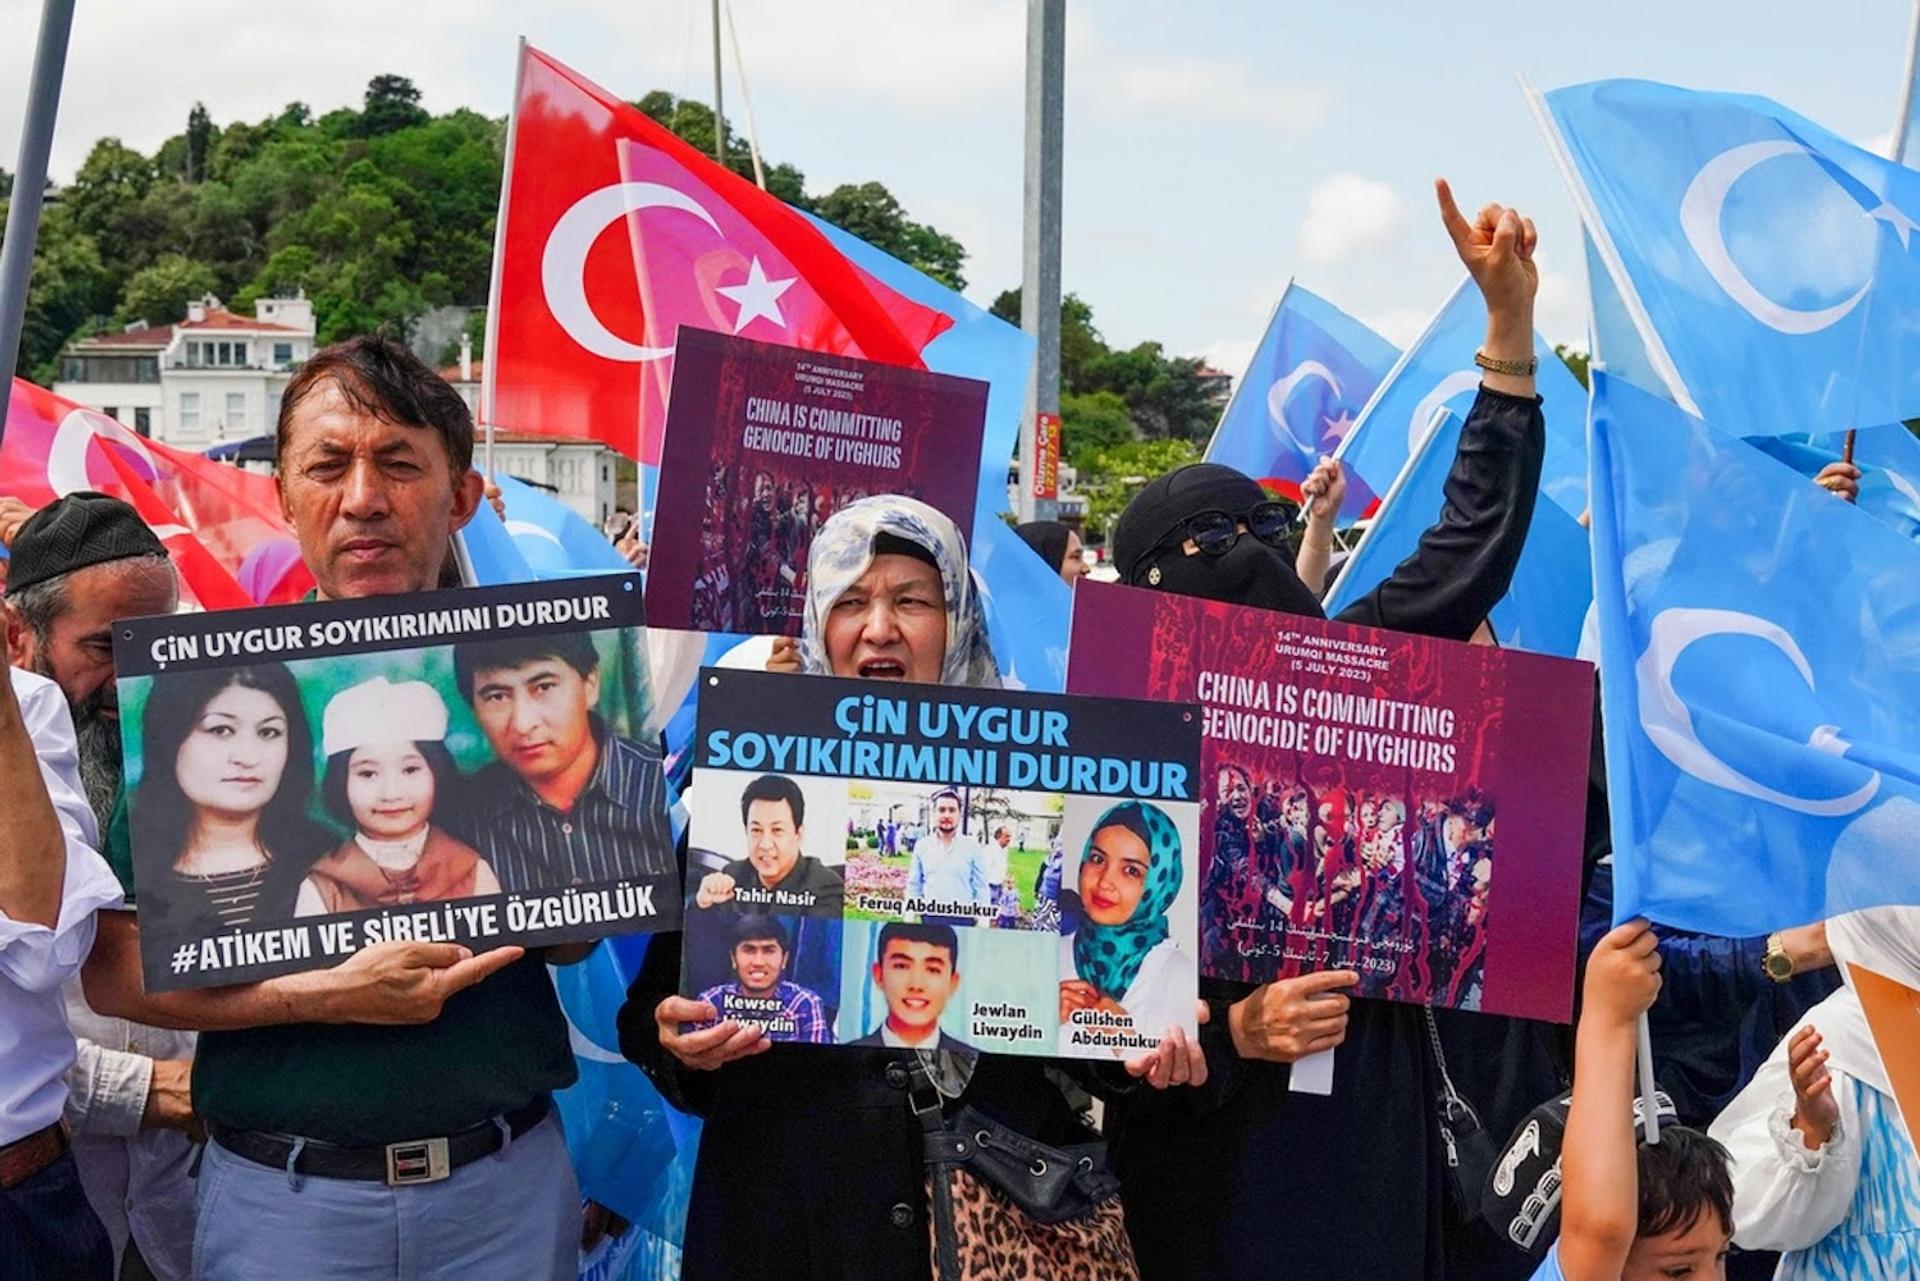 Uyghurs protest at the Chinese consulate in Istanbul